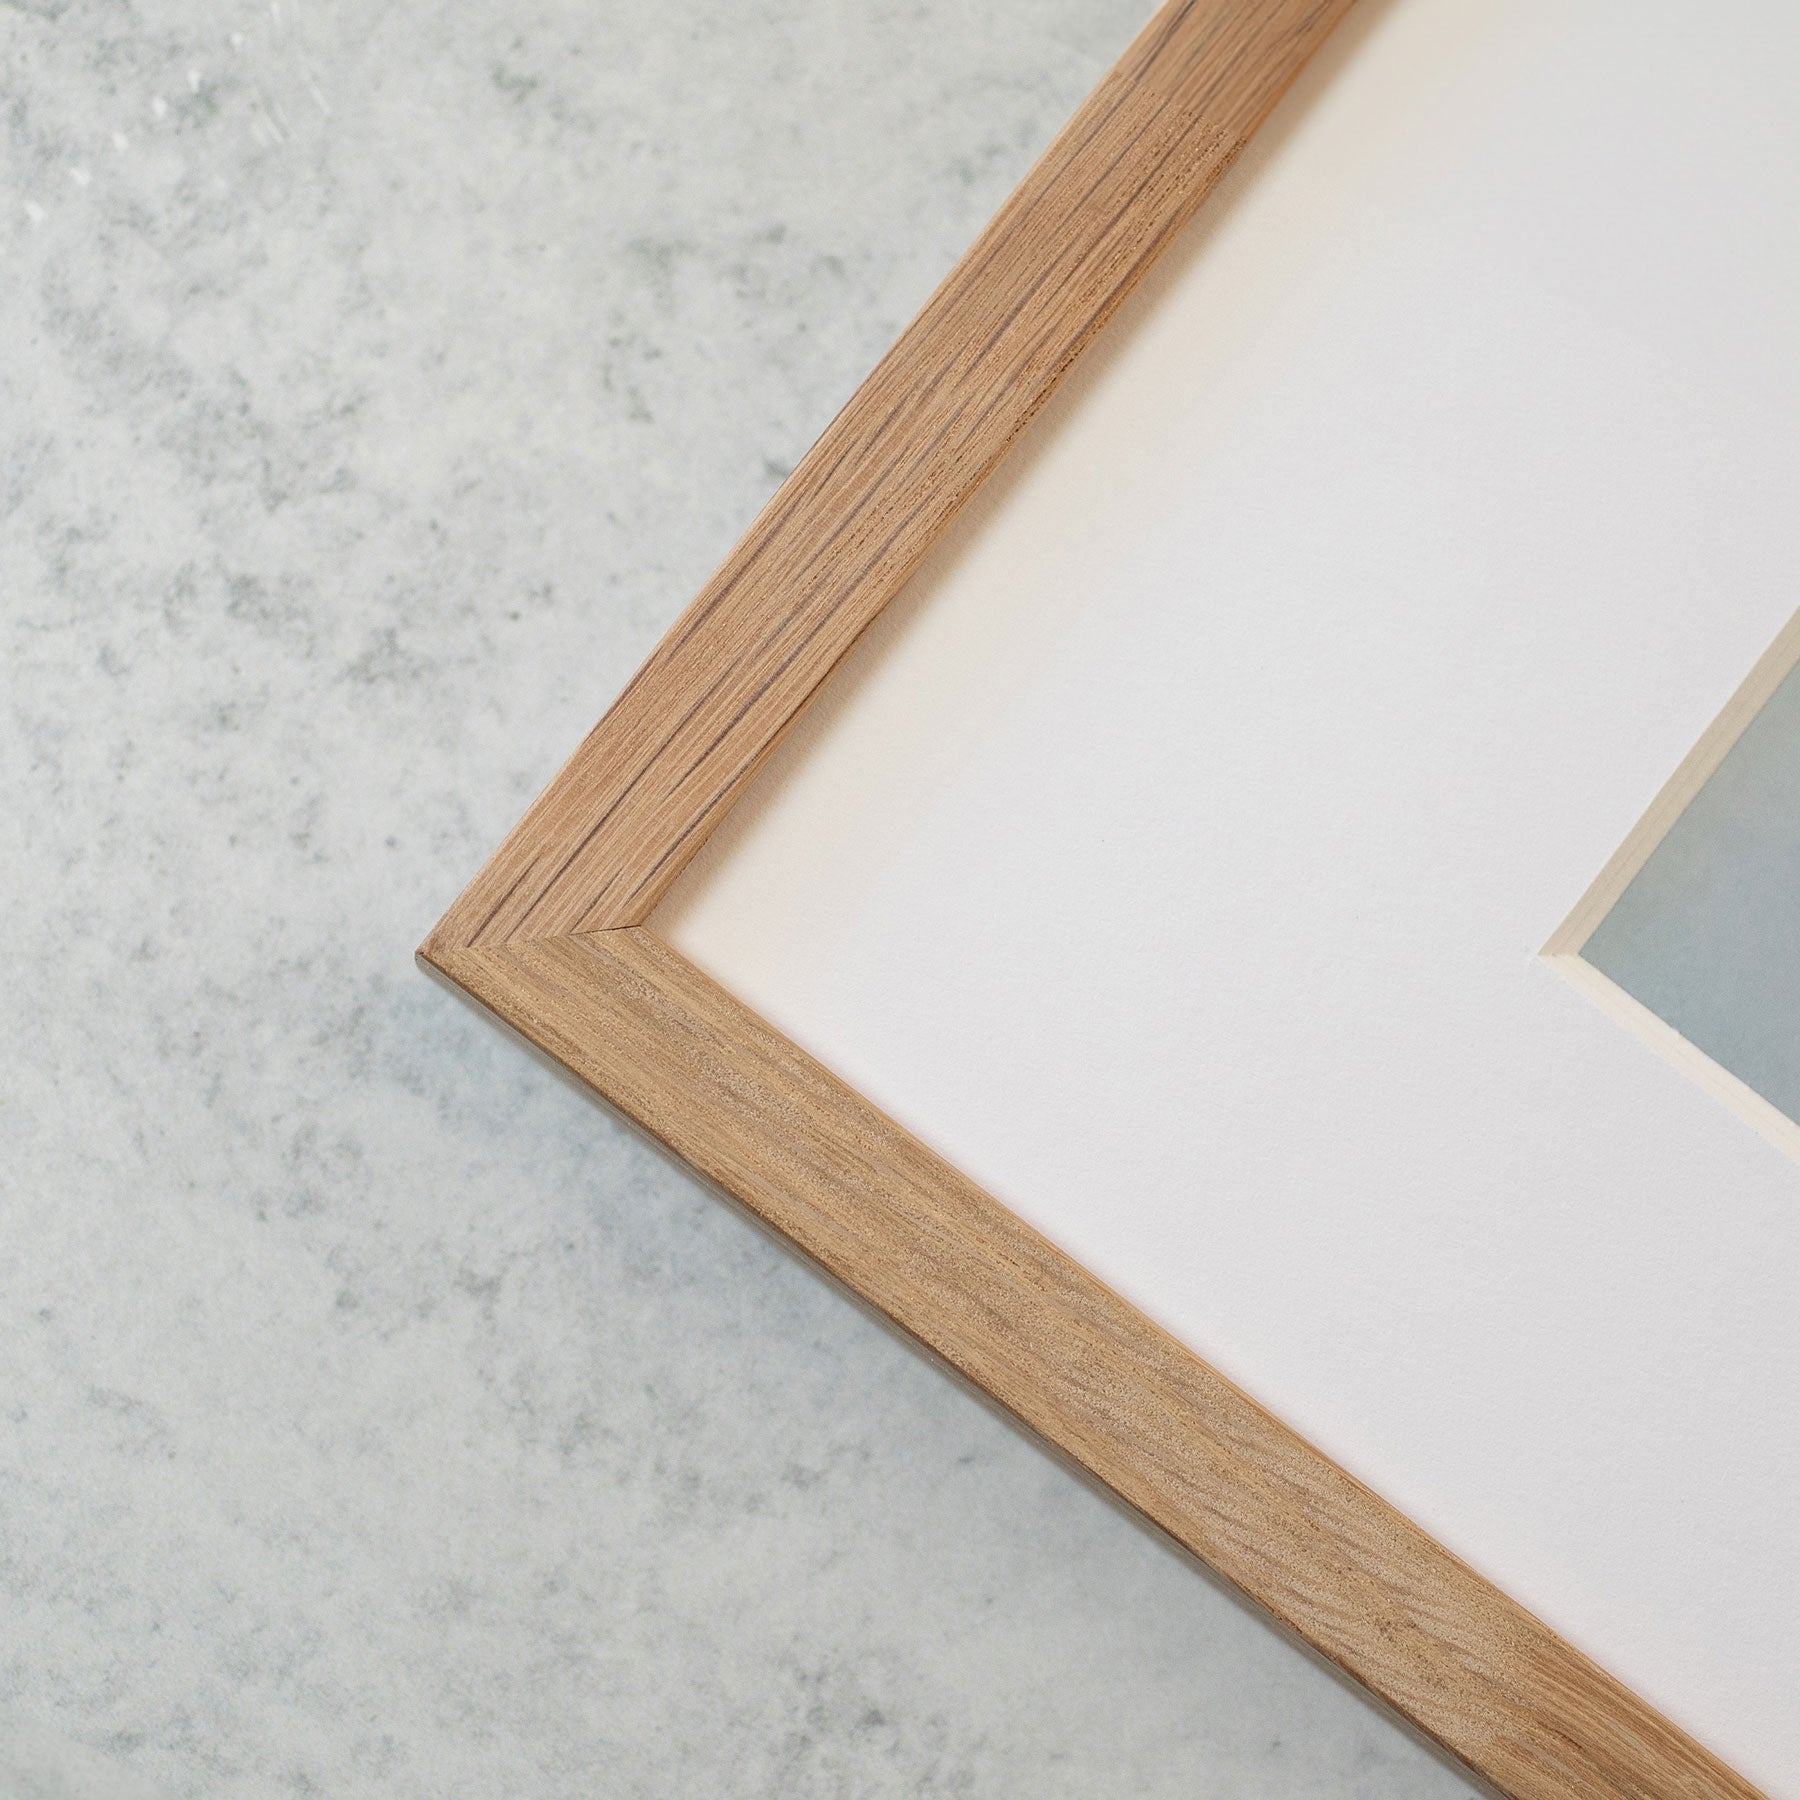 Close-up of a wooden picture frame corner with Offley Green&#39;s Abstract Teal Green Botanical Print, &#39;Teal Petals&#39; on archival photographic paper against a marble background. The focus is on the texture of the wood and the clean lines of the frame.